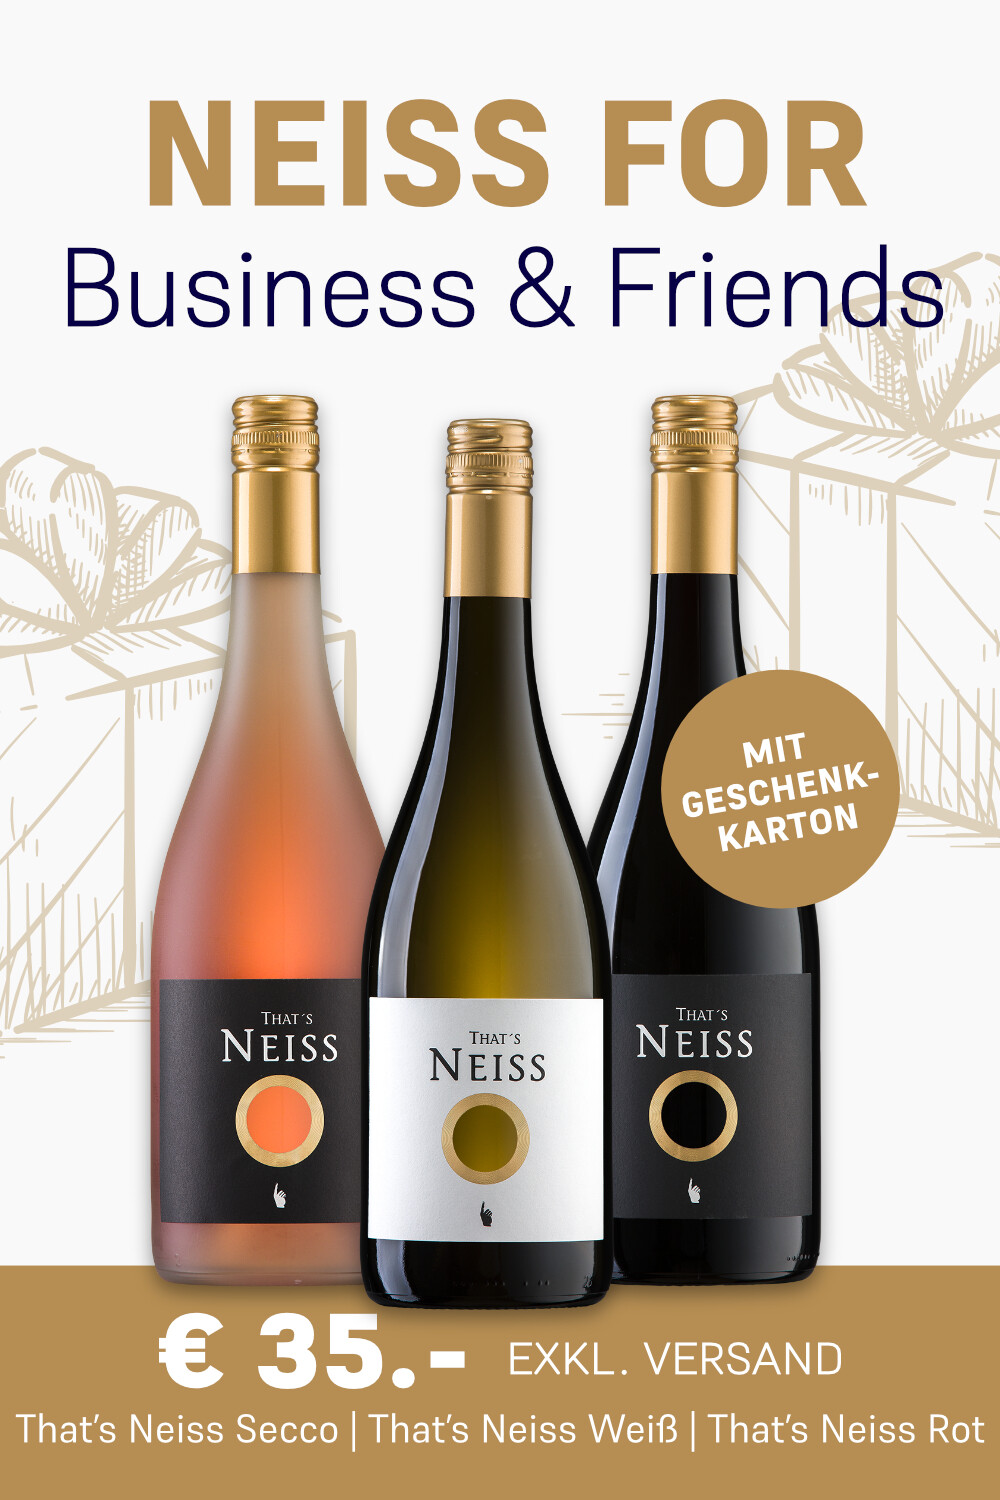 NEISS for Business & Friends I